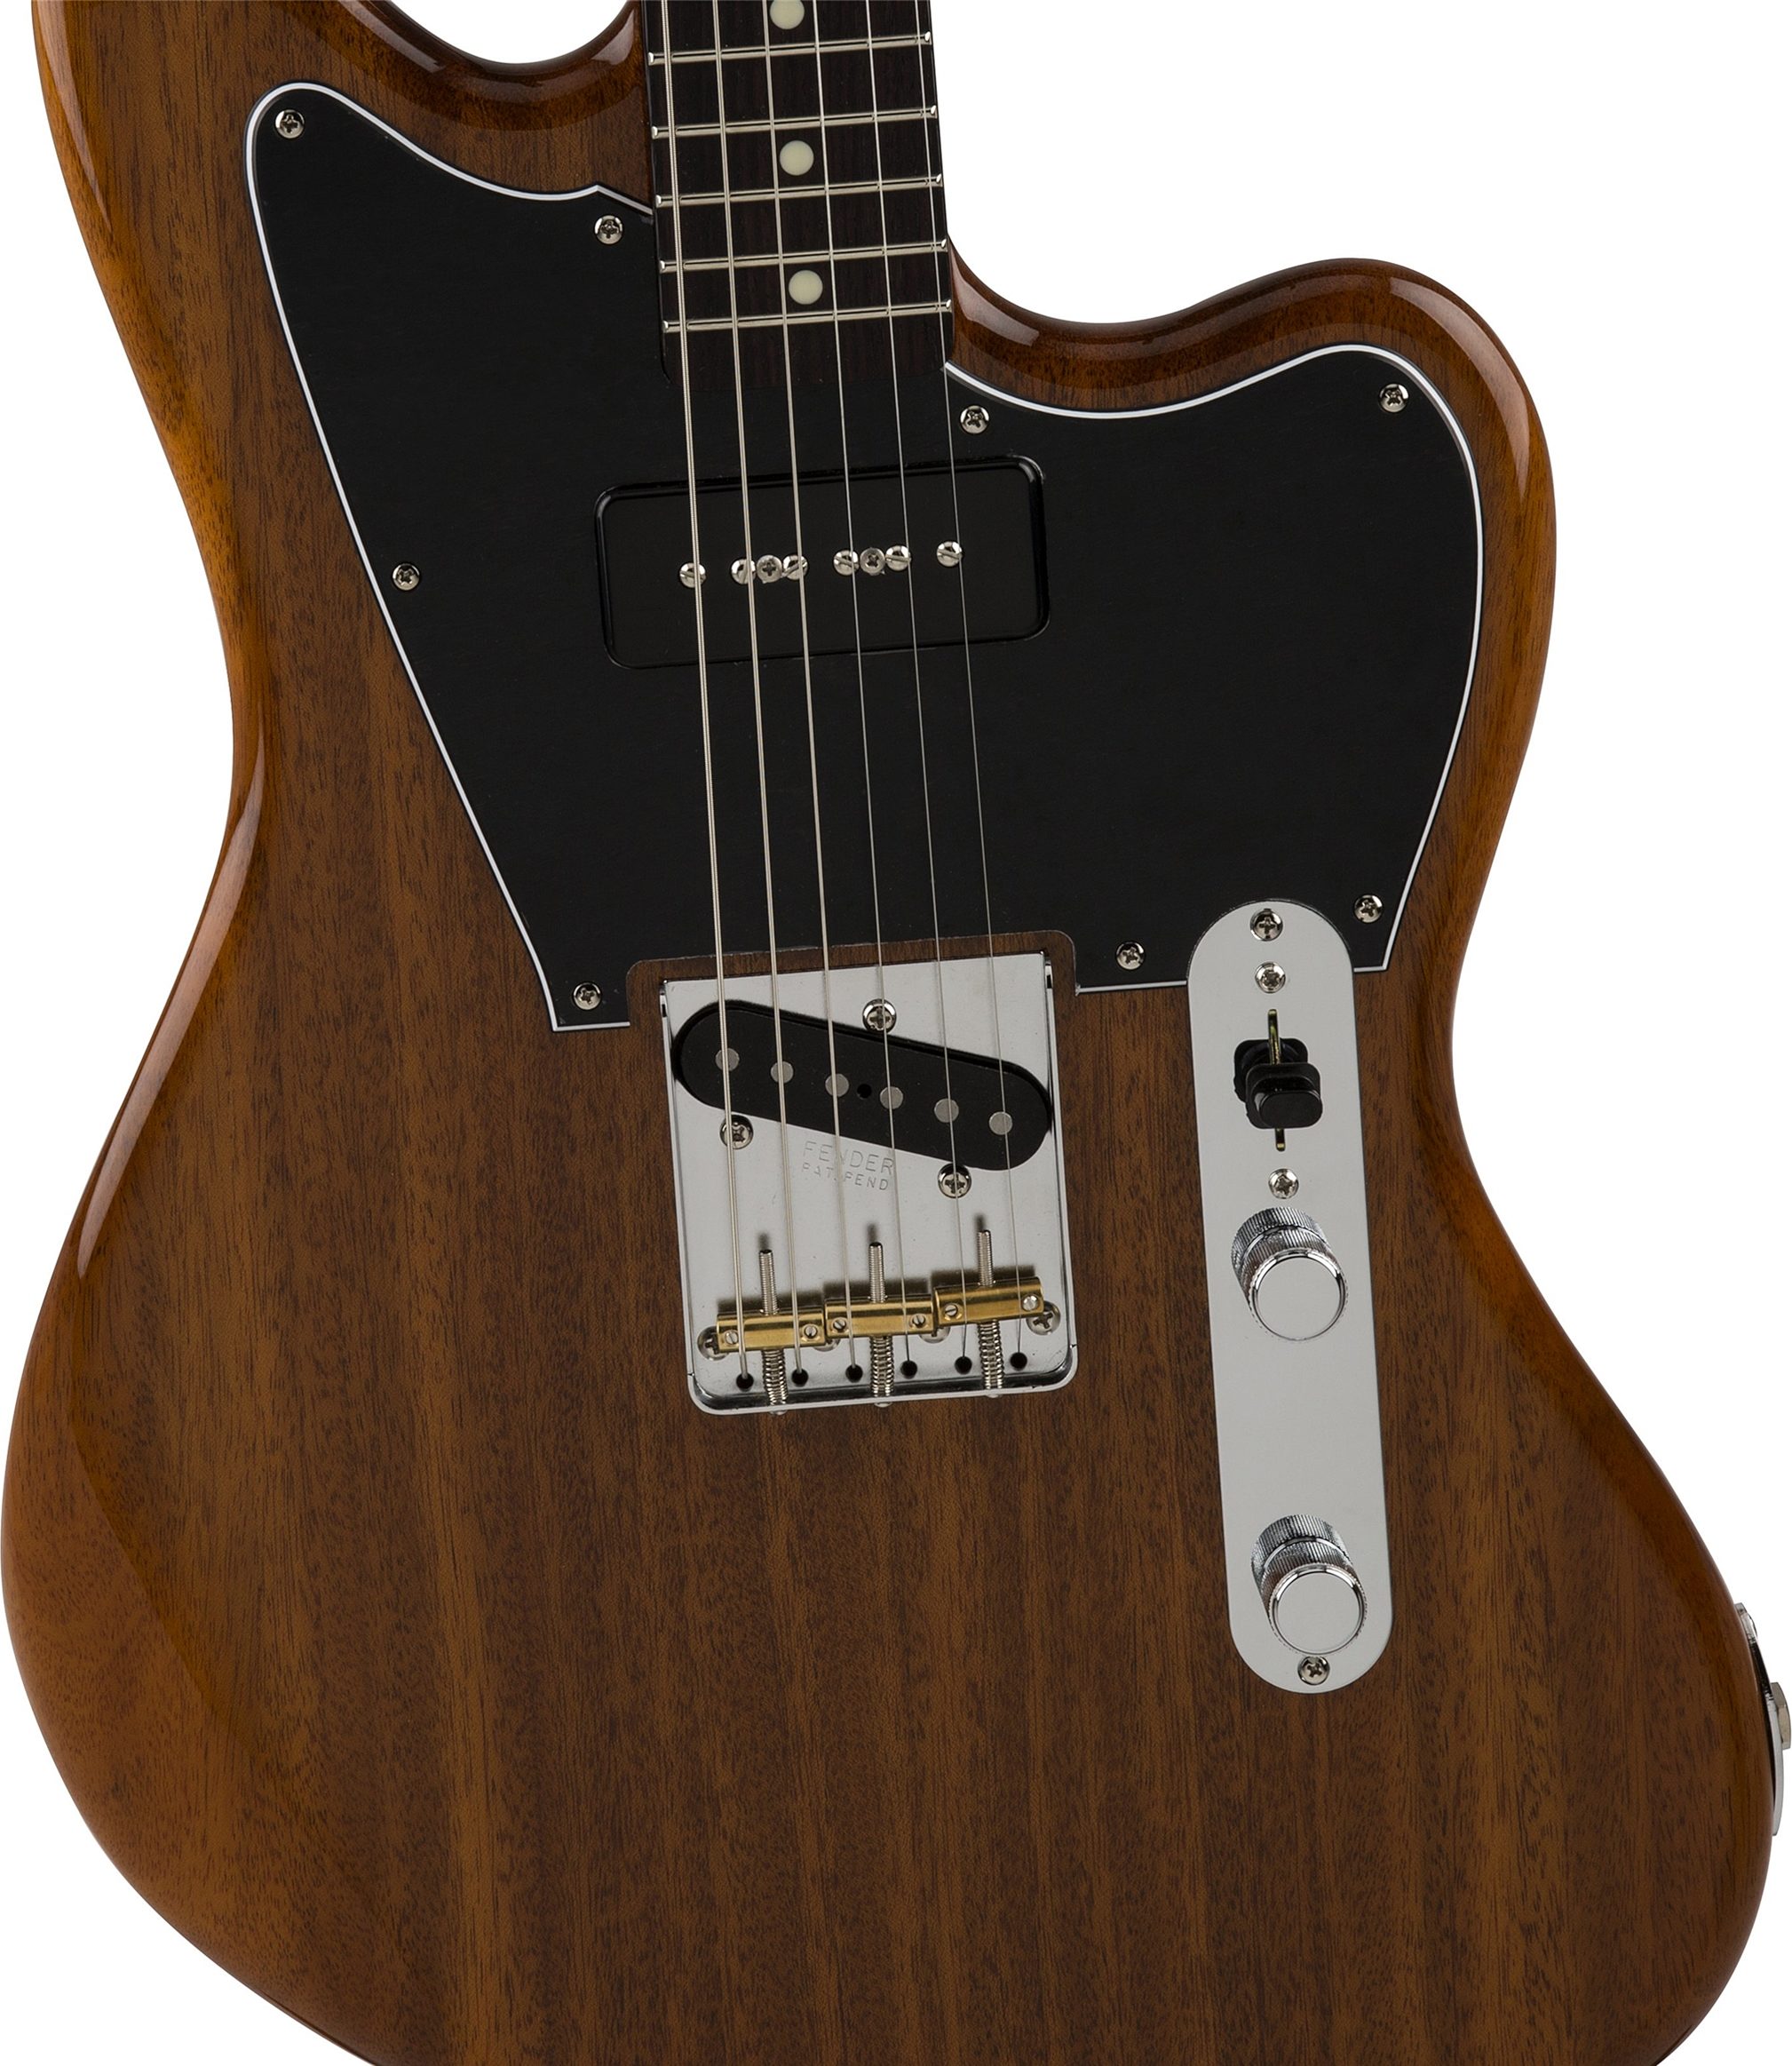 Fender Limited Edition Japan Mahogany Offset Telecaster | zZounds